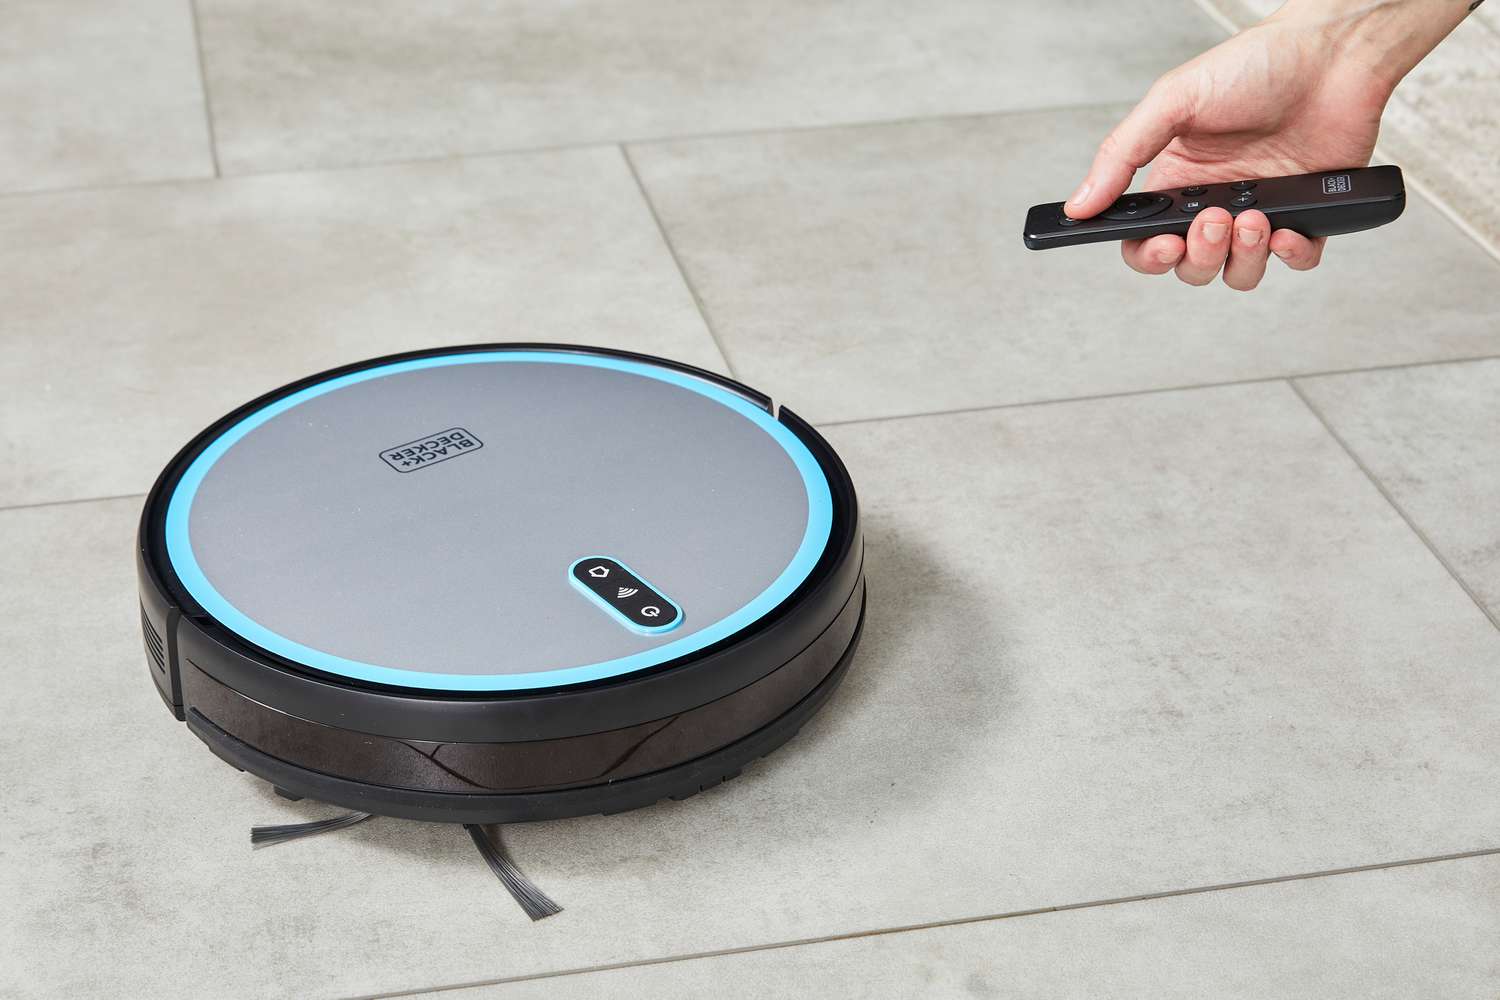 A person uses the remote to control the Black + Decker RoboSeries Robot Vacuum 